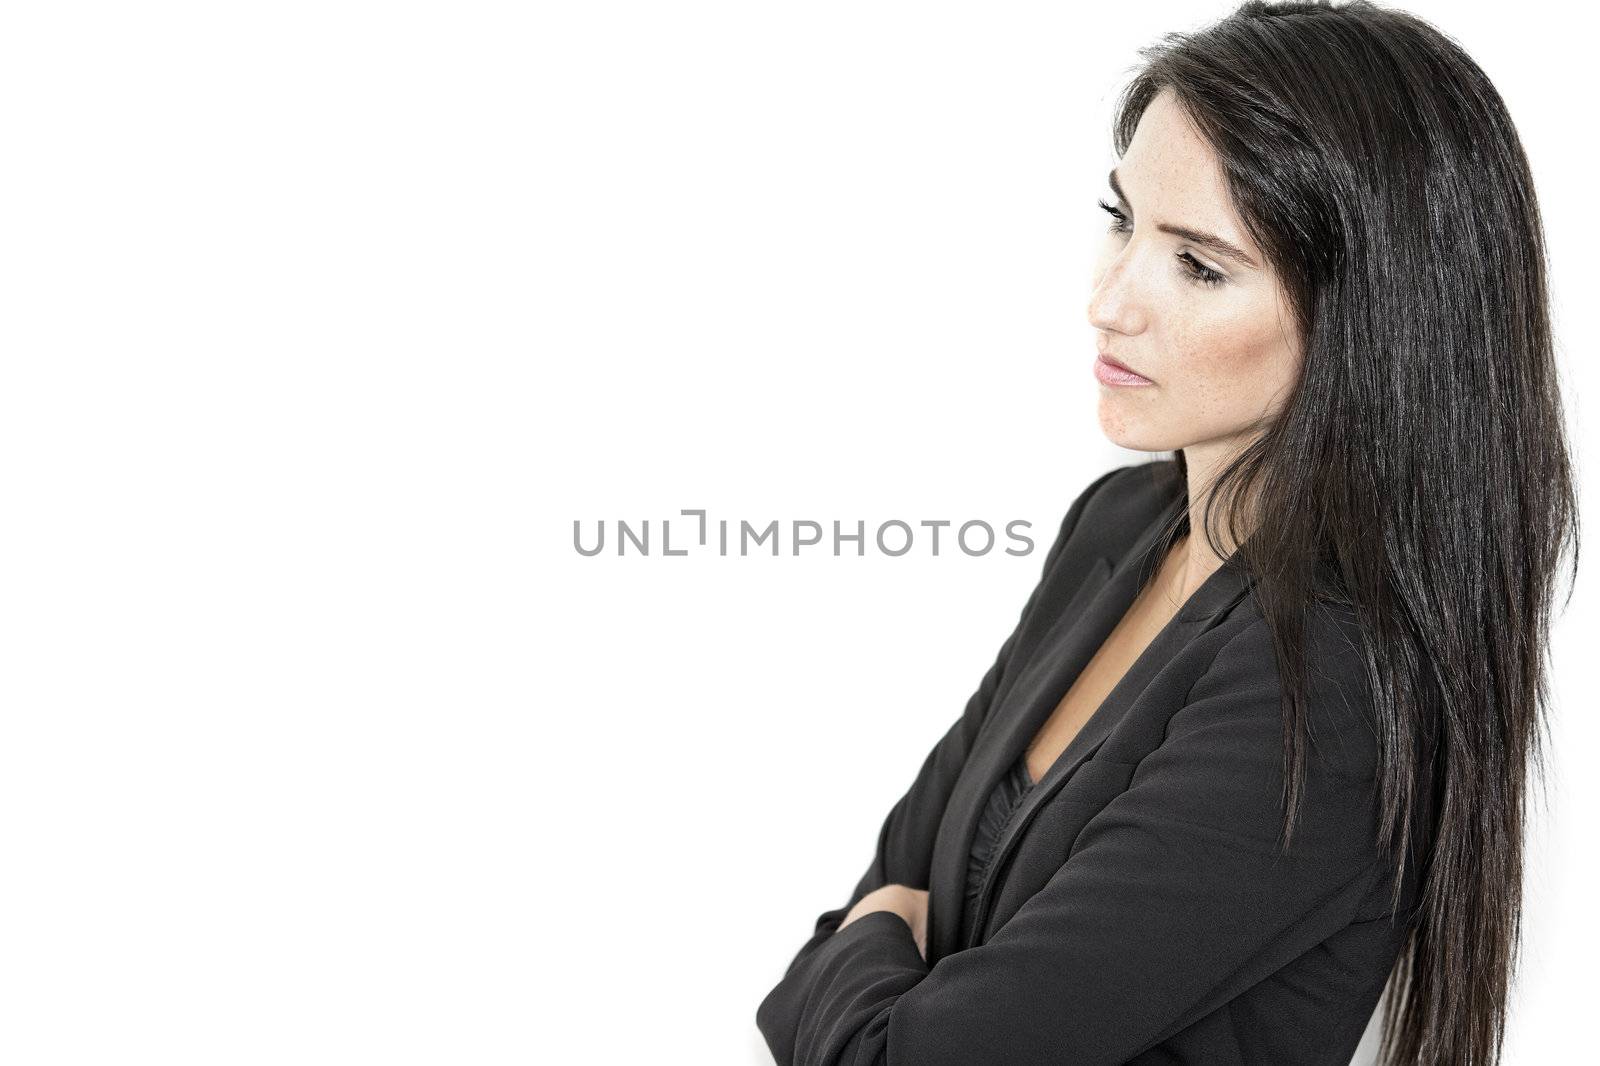 Professional working woman in corporate business clothes with a serious look